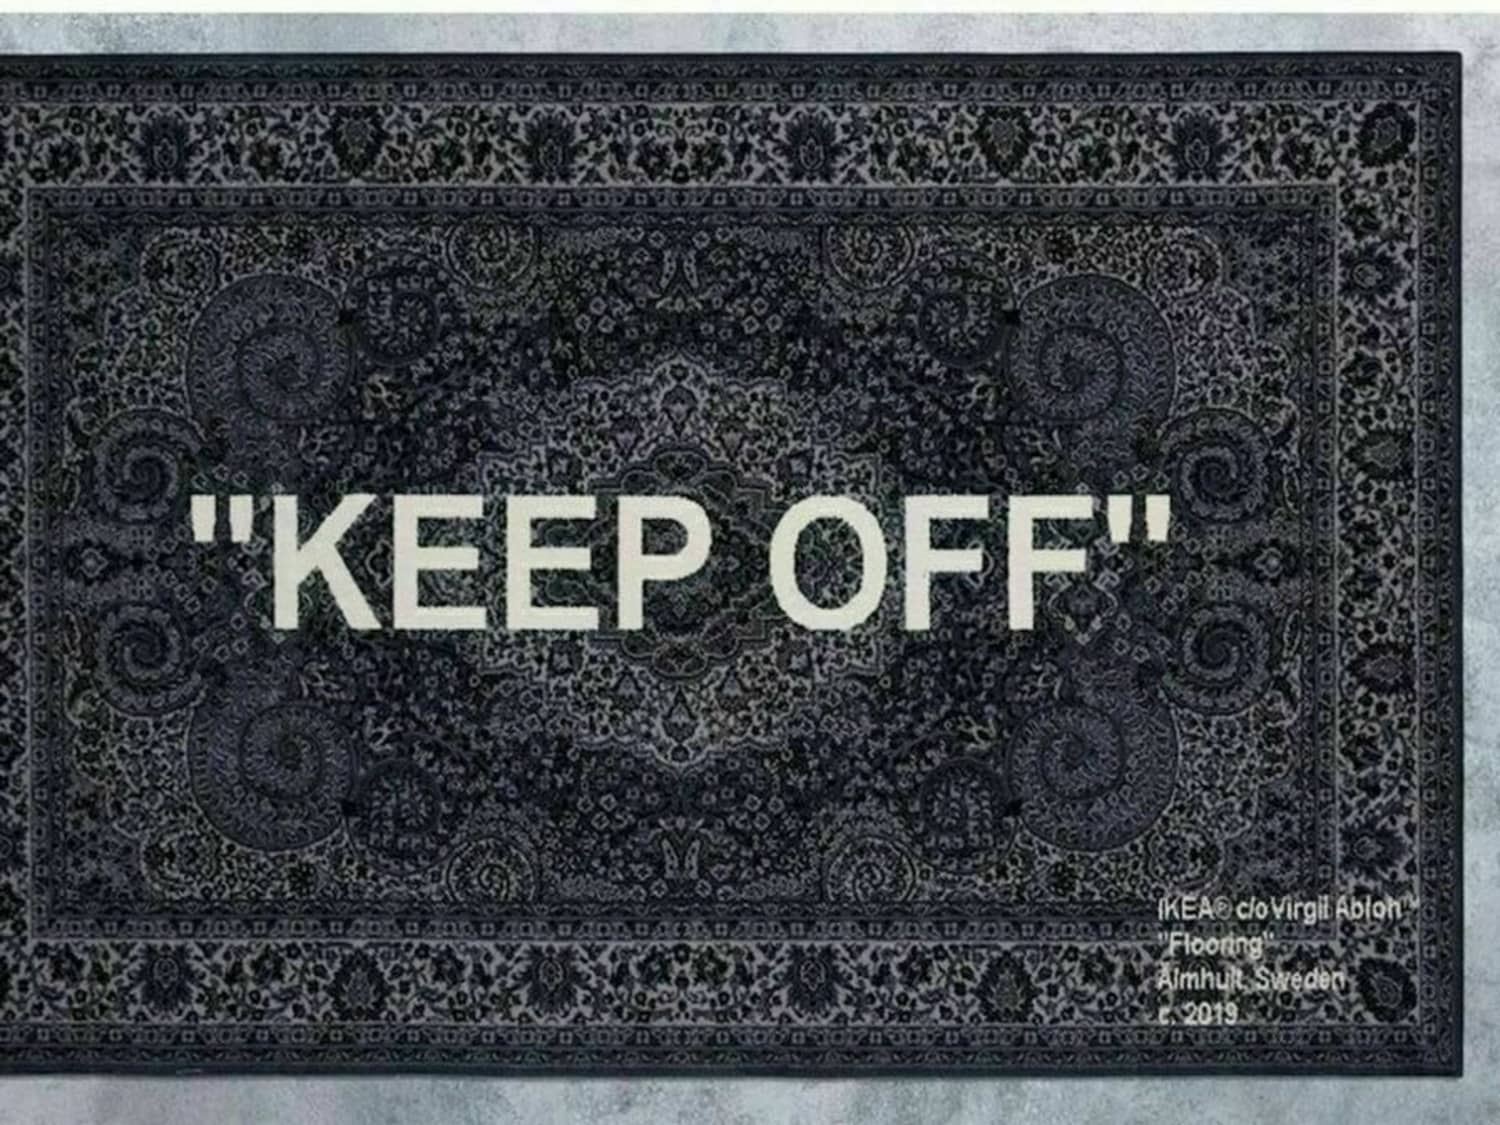 Want a rug designed by Virgil Abloh? You'll have to get in line